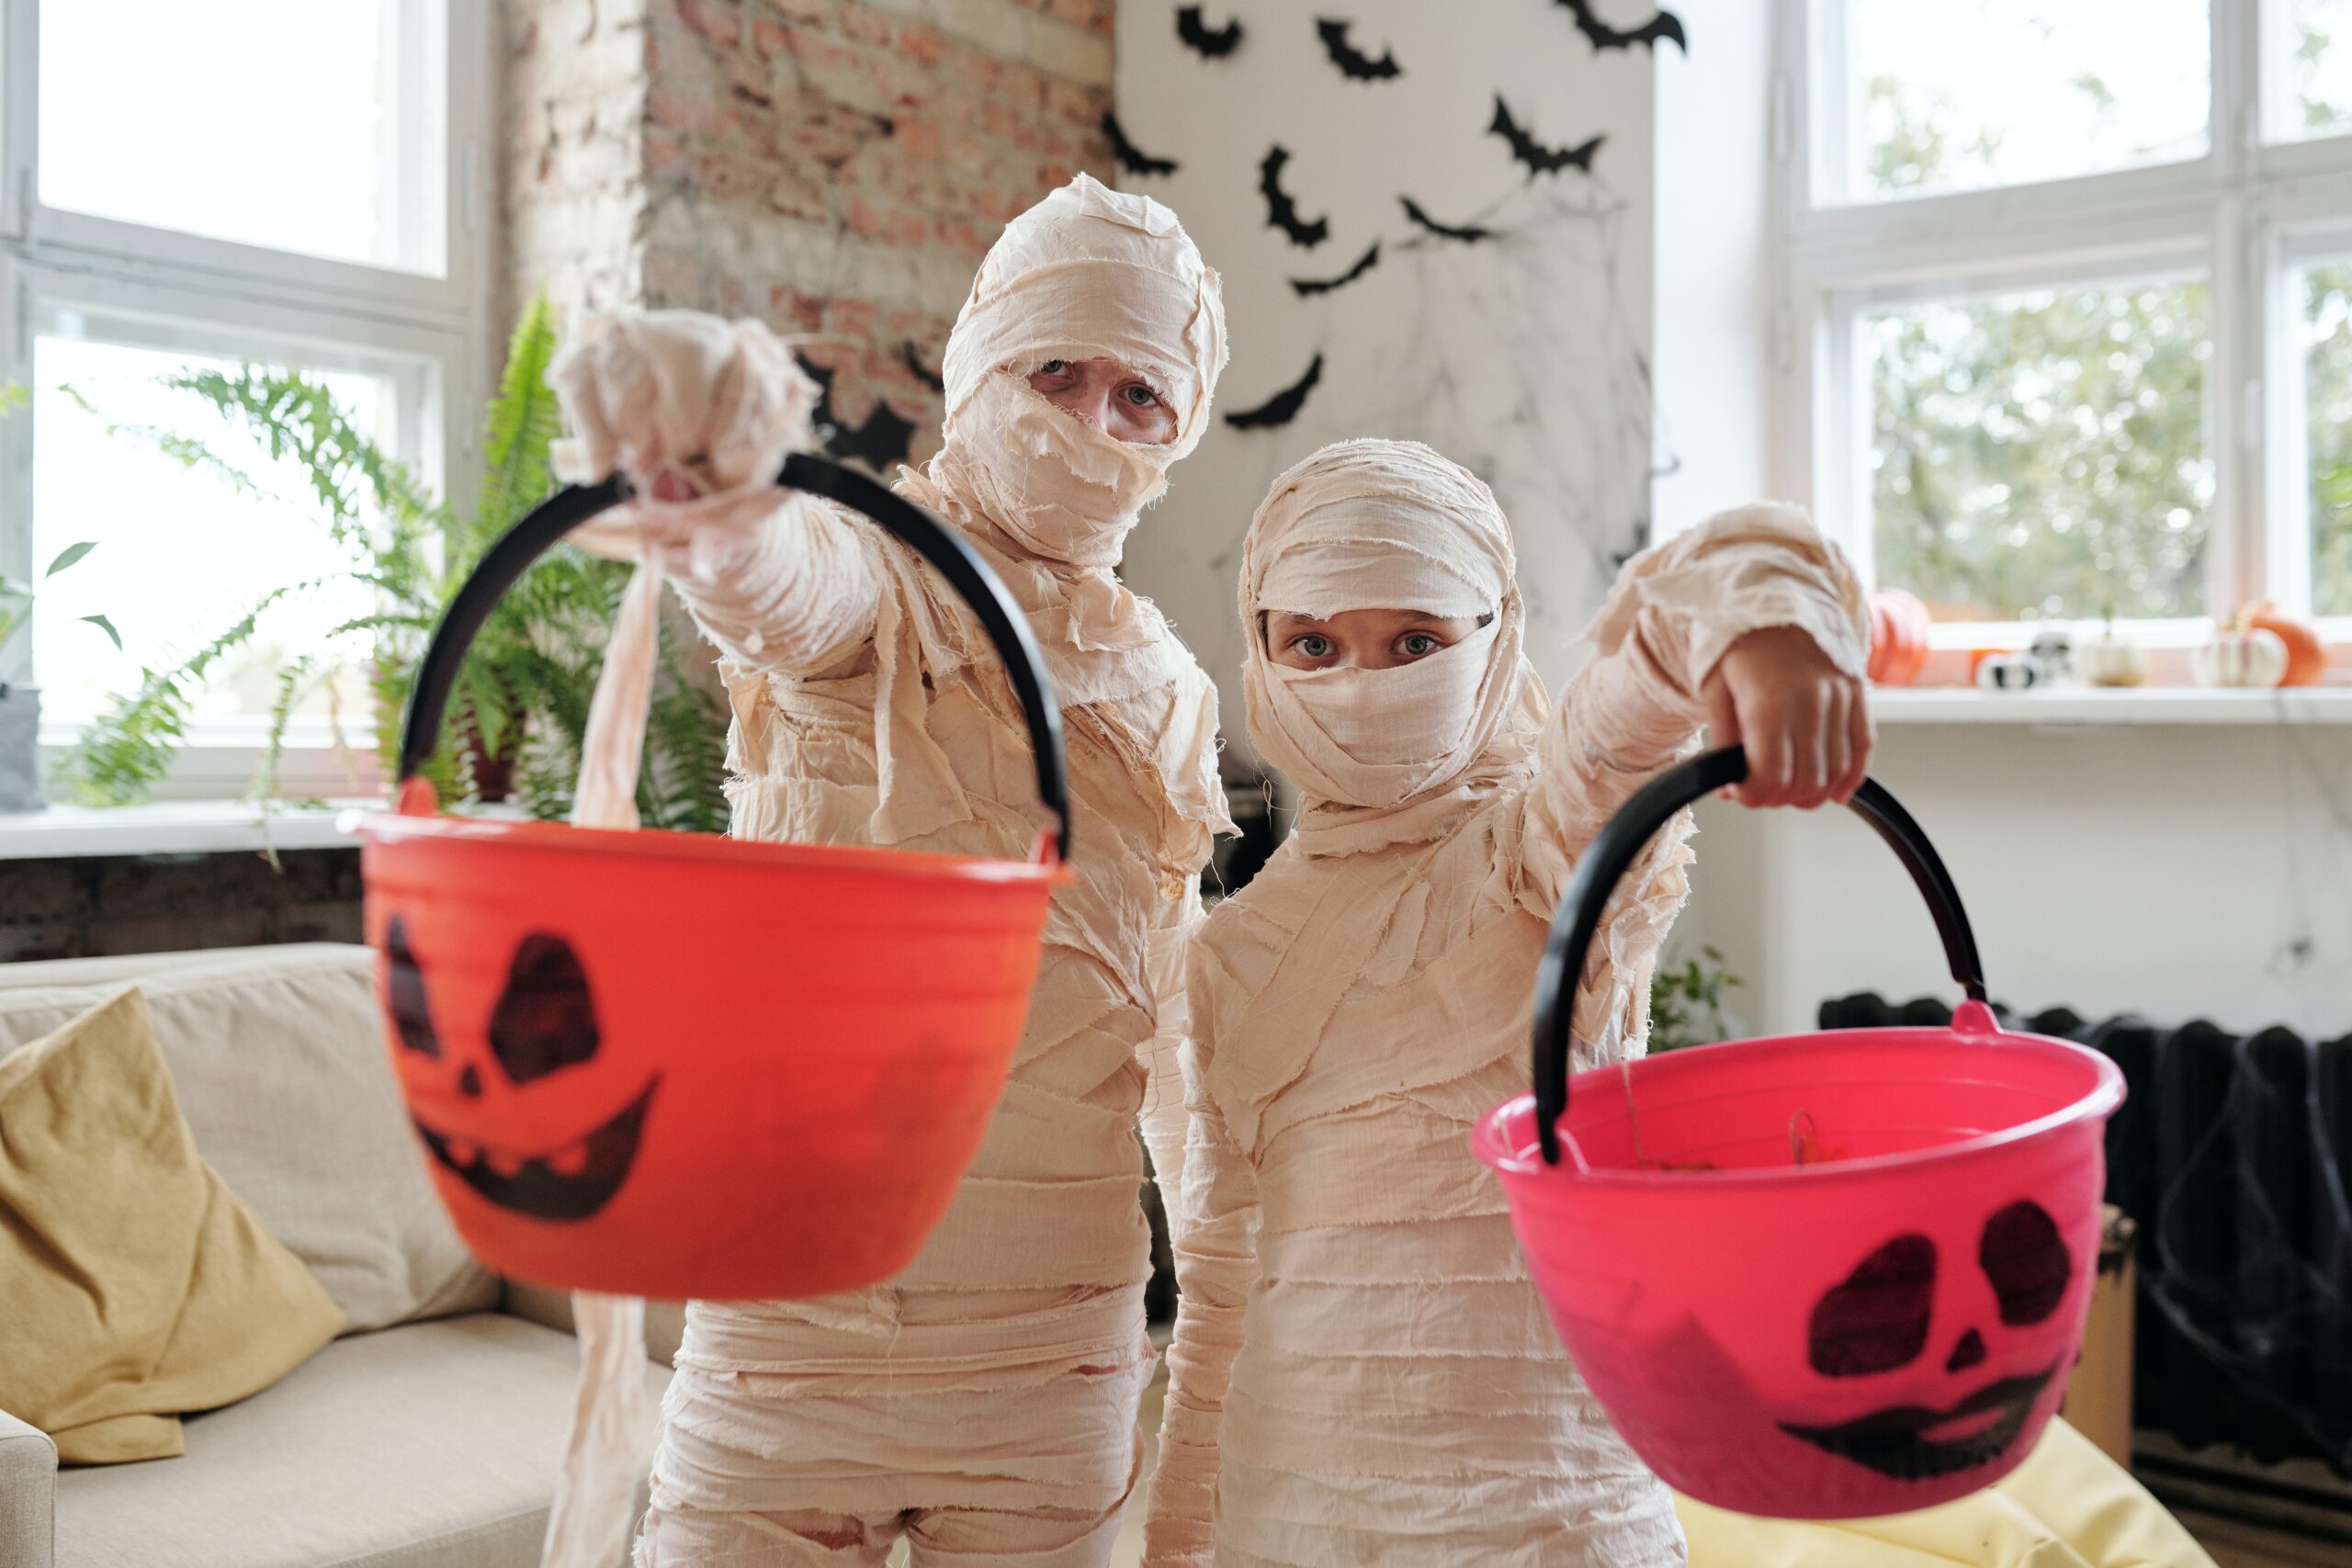 Halloween At Home? Tips for Planning a Safe 2020 Halloween